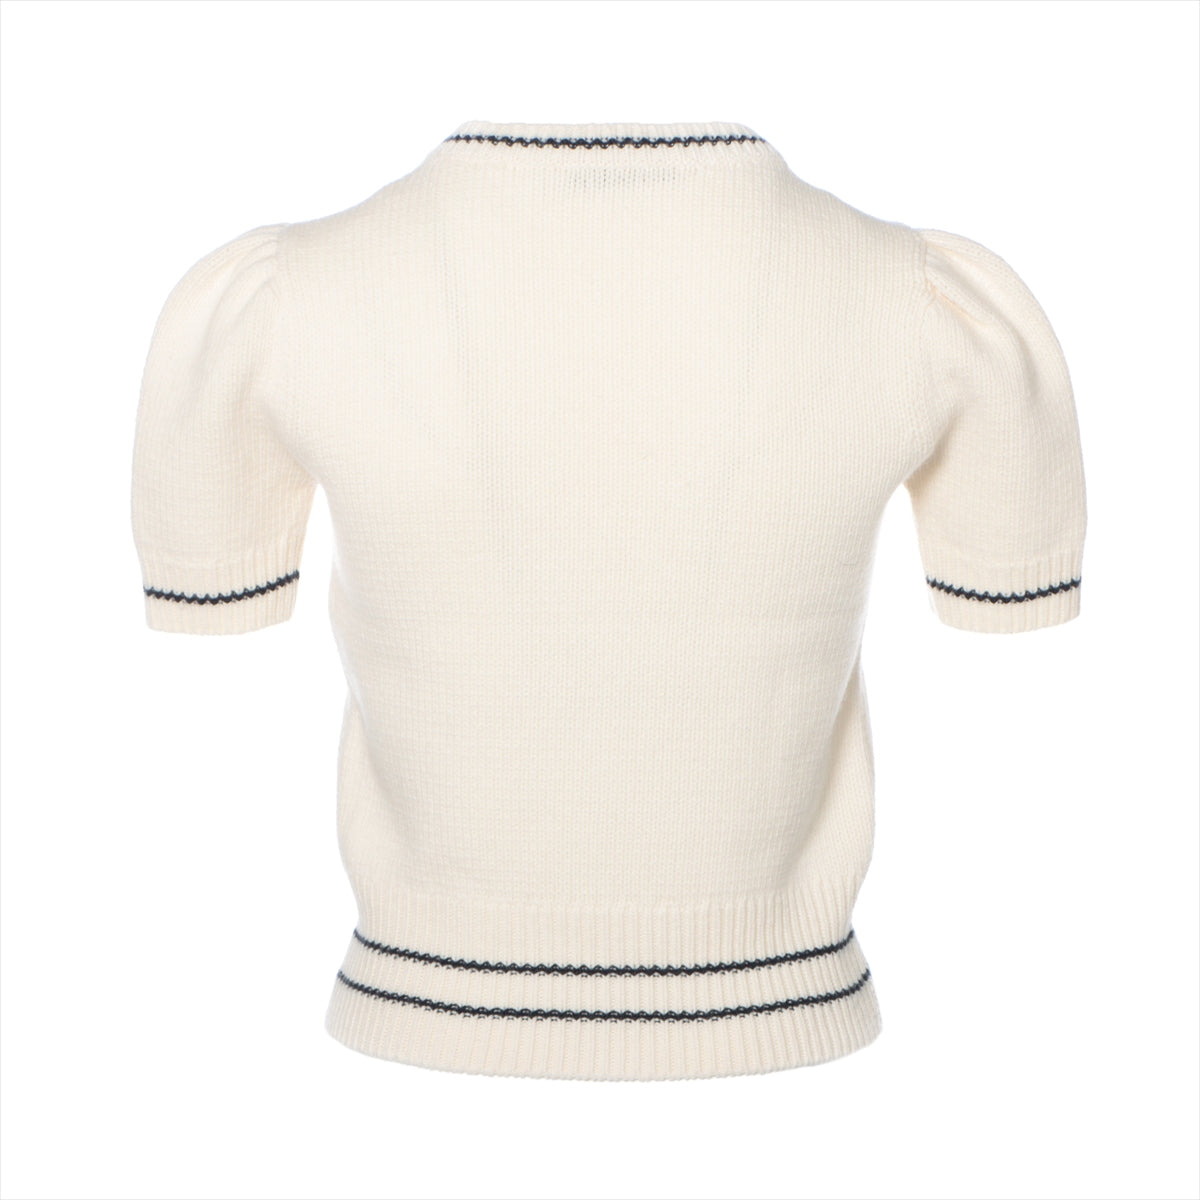 Christian Dior Wool & Cashmere Short Sleeve Knitwear I38 Ladies' White  154S09AM305